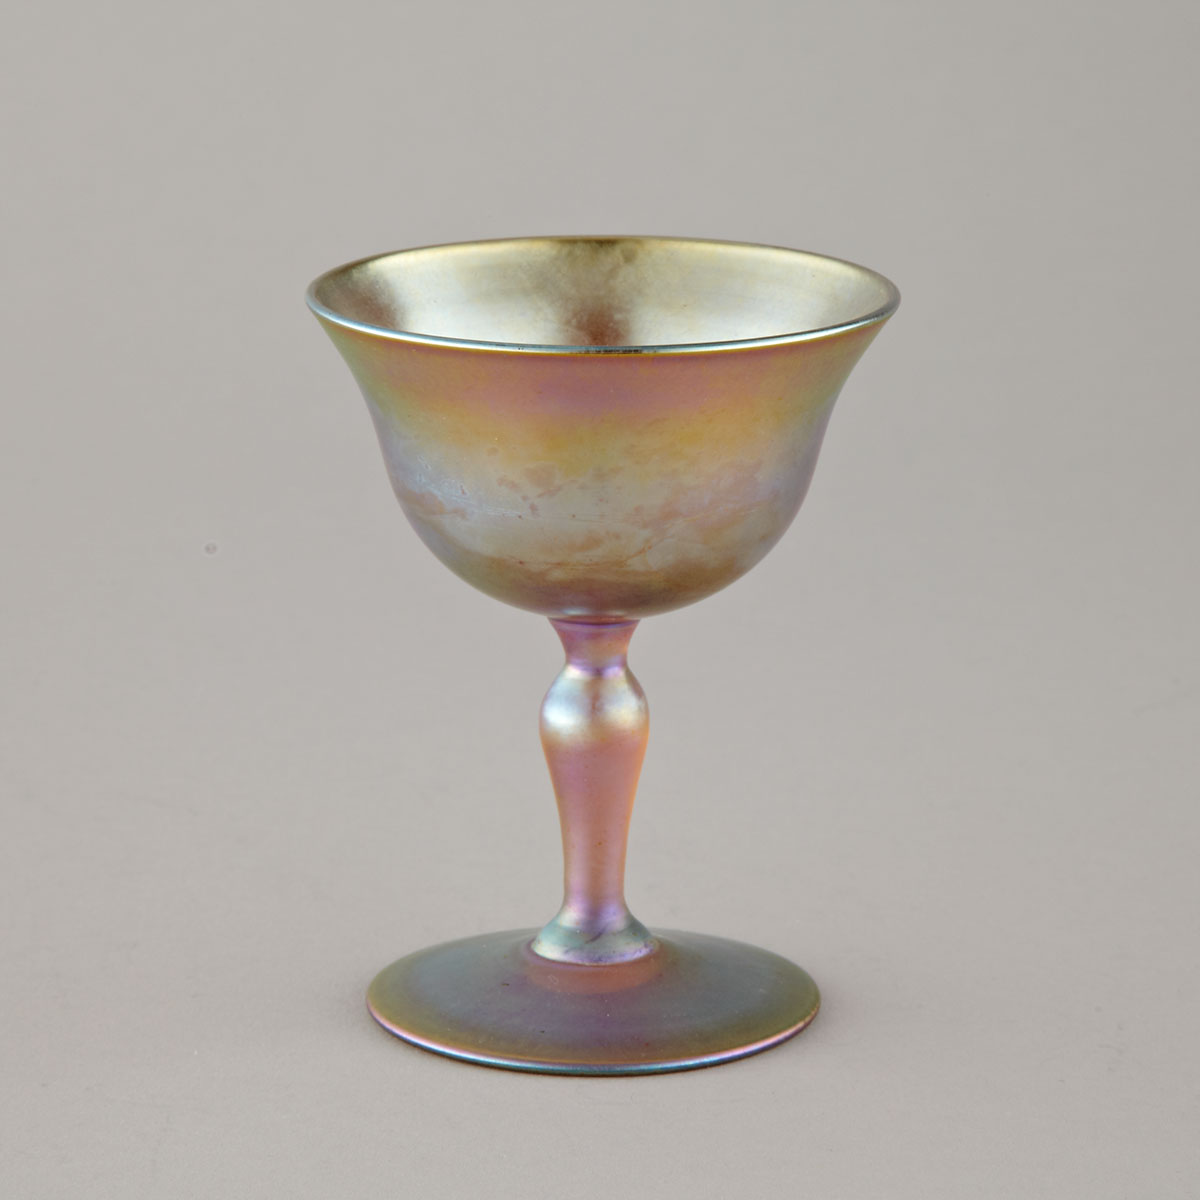 Tiffany ‘Favrile’ Iridescent Glass Goblet, early 20th century